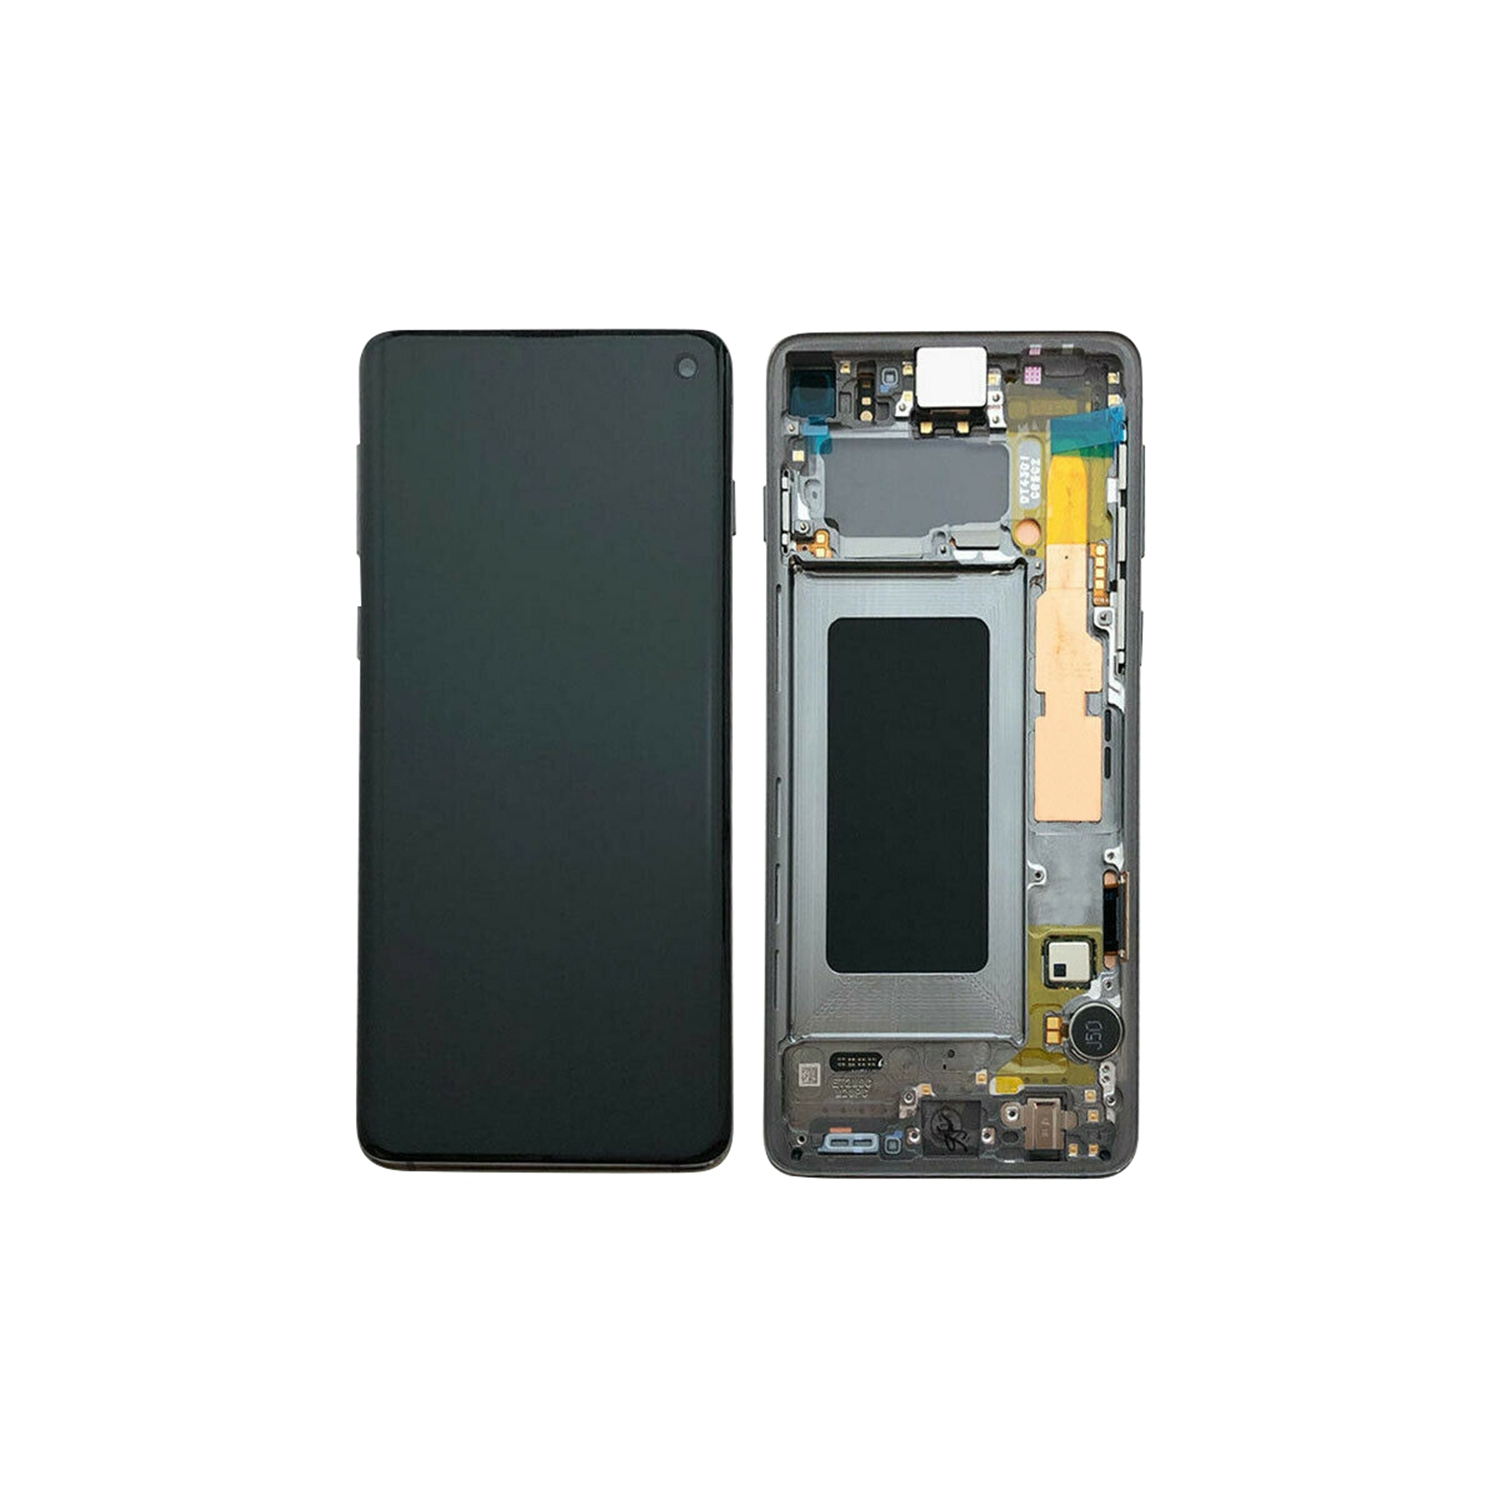 Replacement OLED Display Touch Screen Digitizer With Frame Assembly For Samsung Galaxy S10 SM-G973W - Prism Black